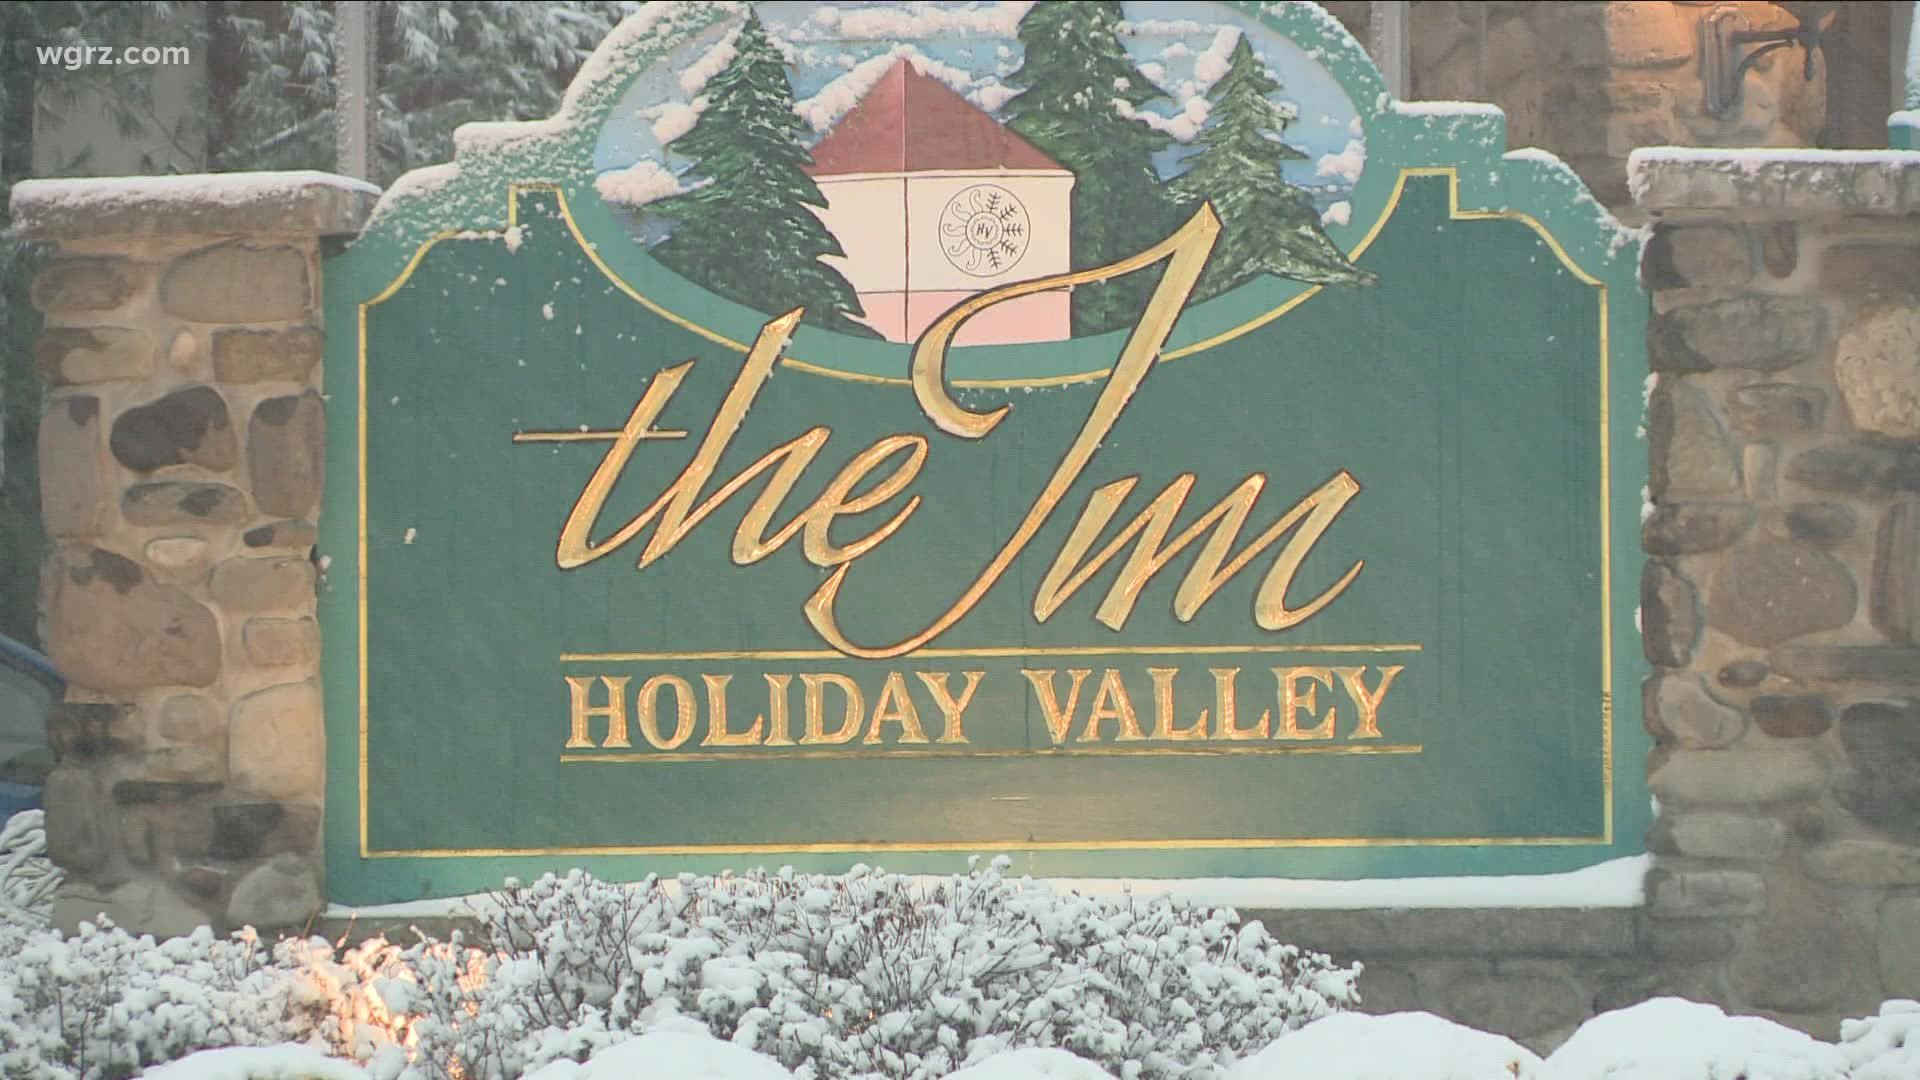 Ellicottville welcomes back fully vaccinated Canadian travelers who can now visit for  the first time in almost two years.